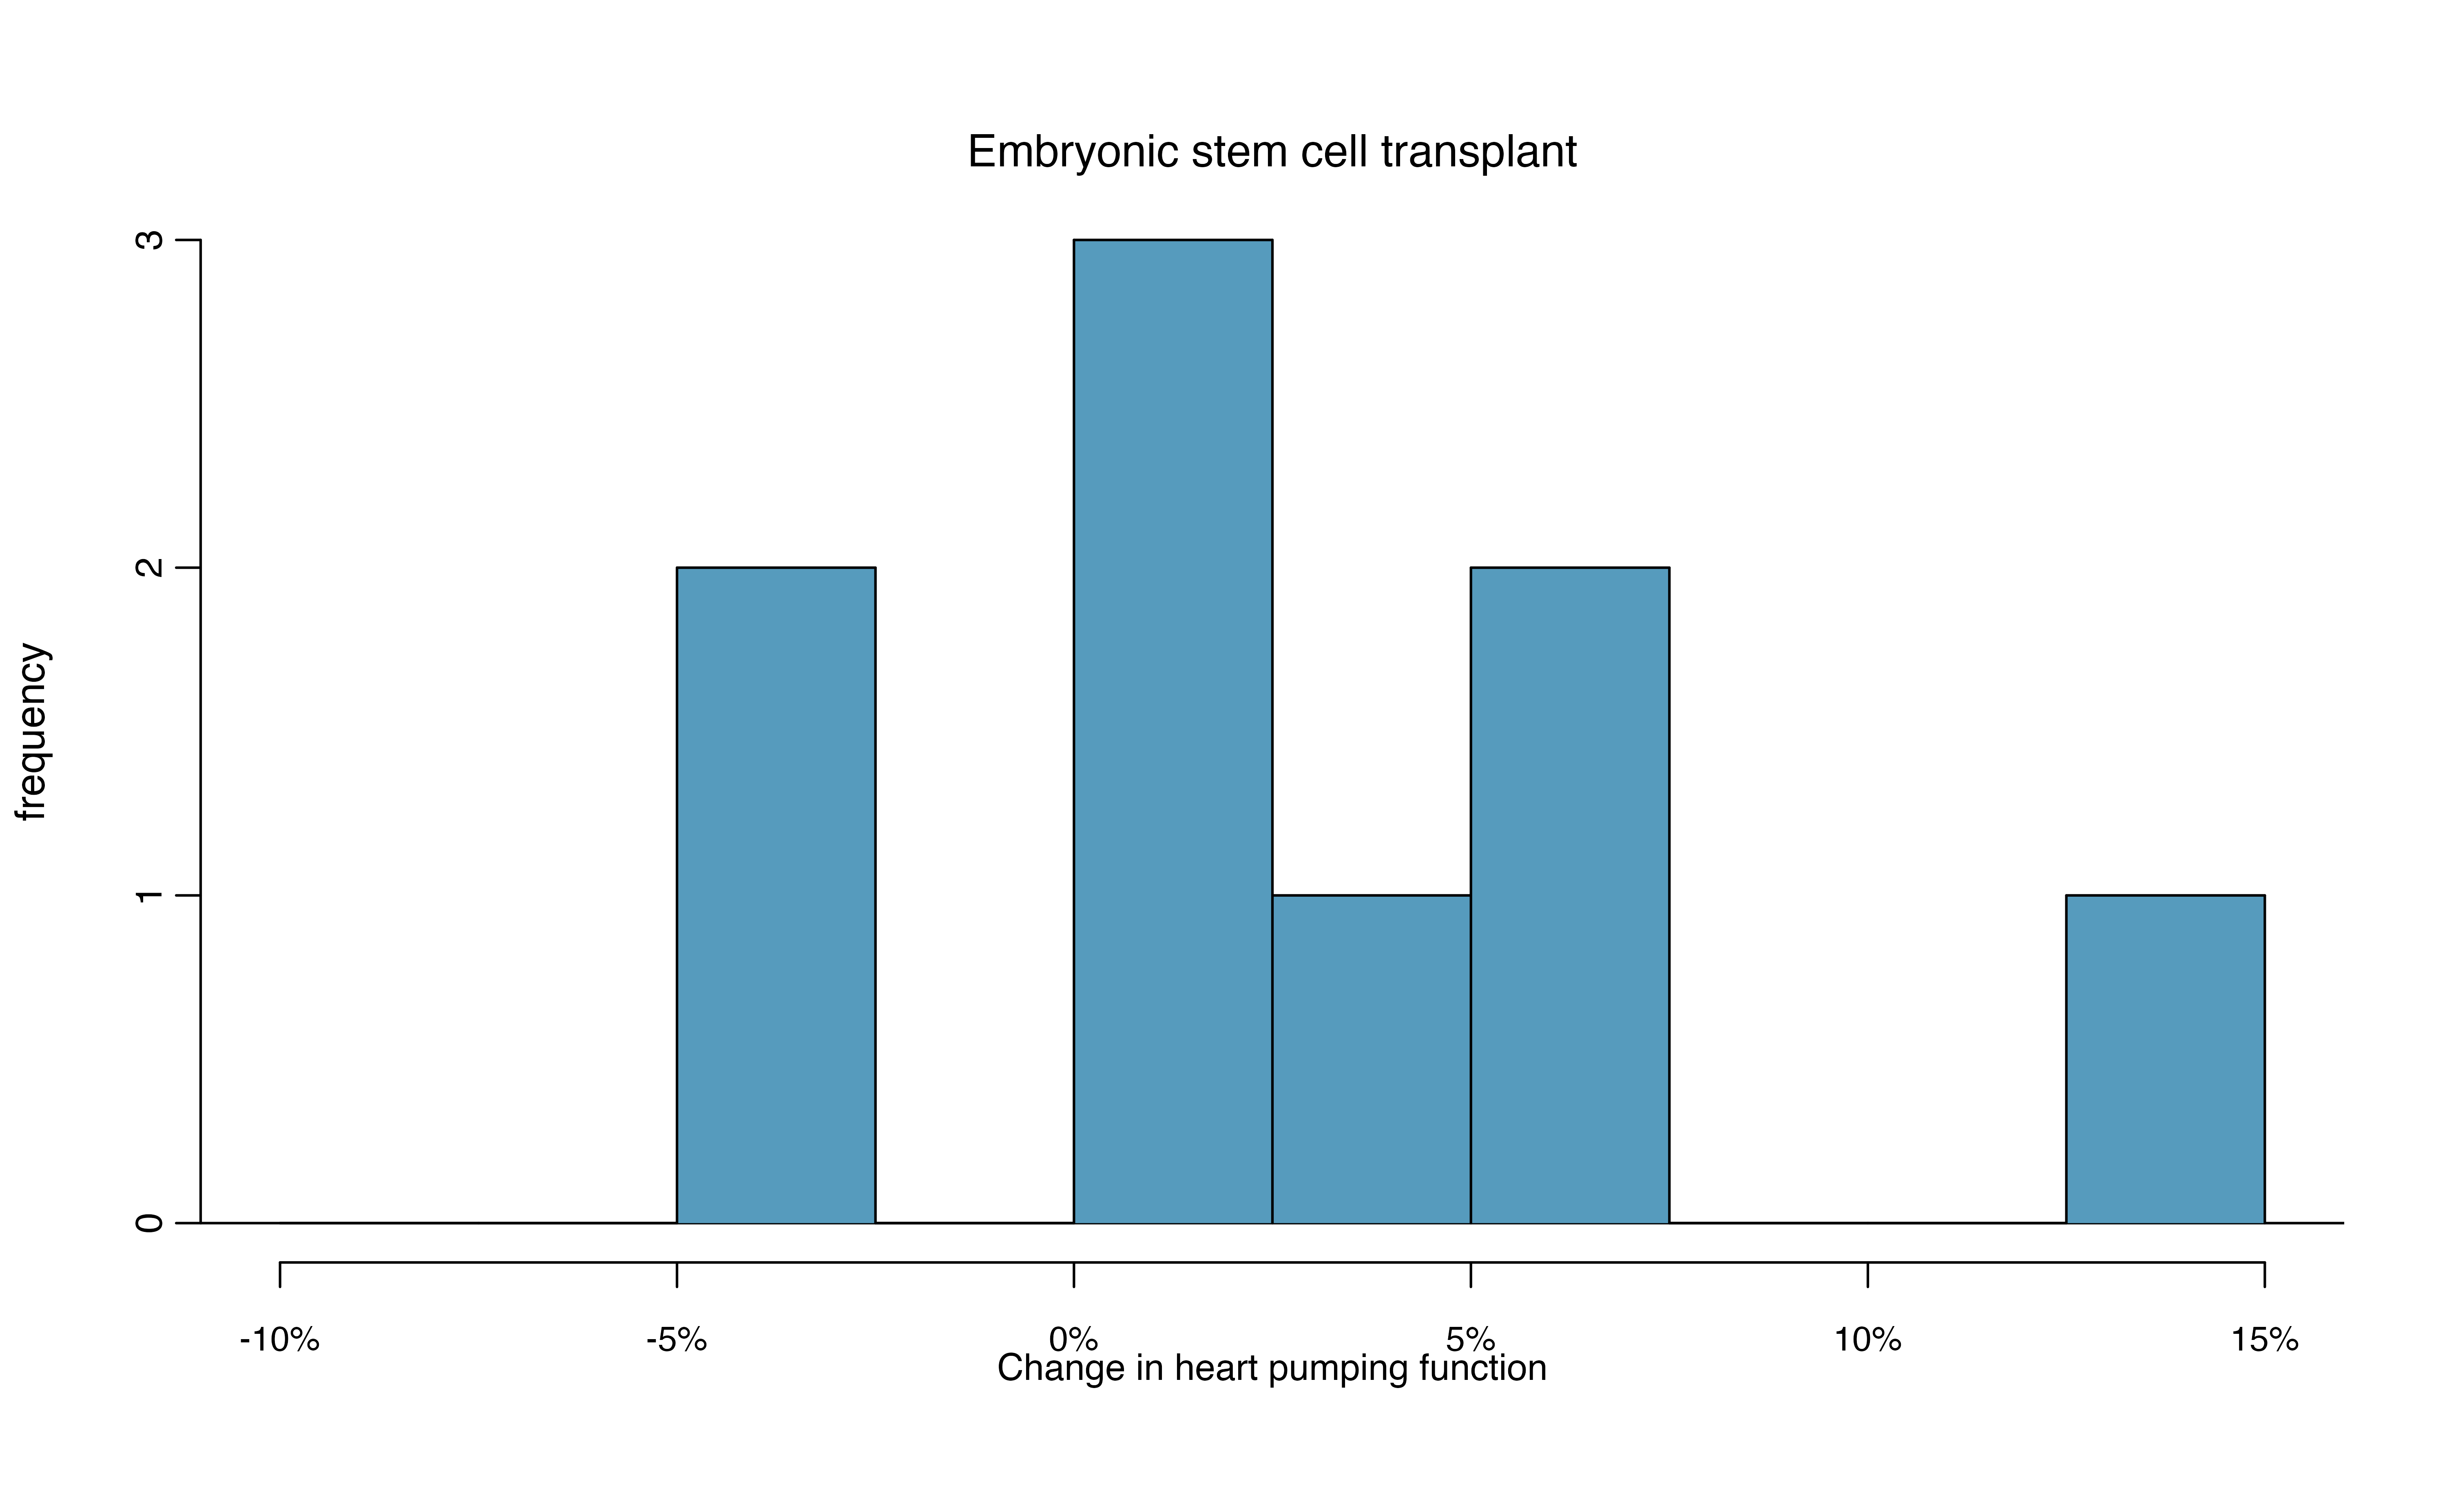 Histograms for both the embryonic stem cell and control group.